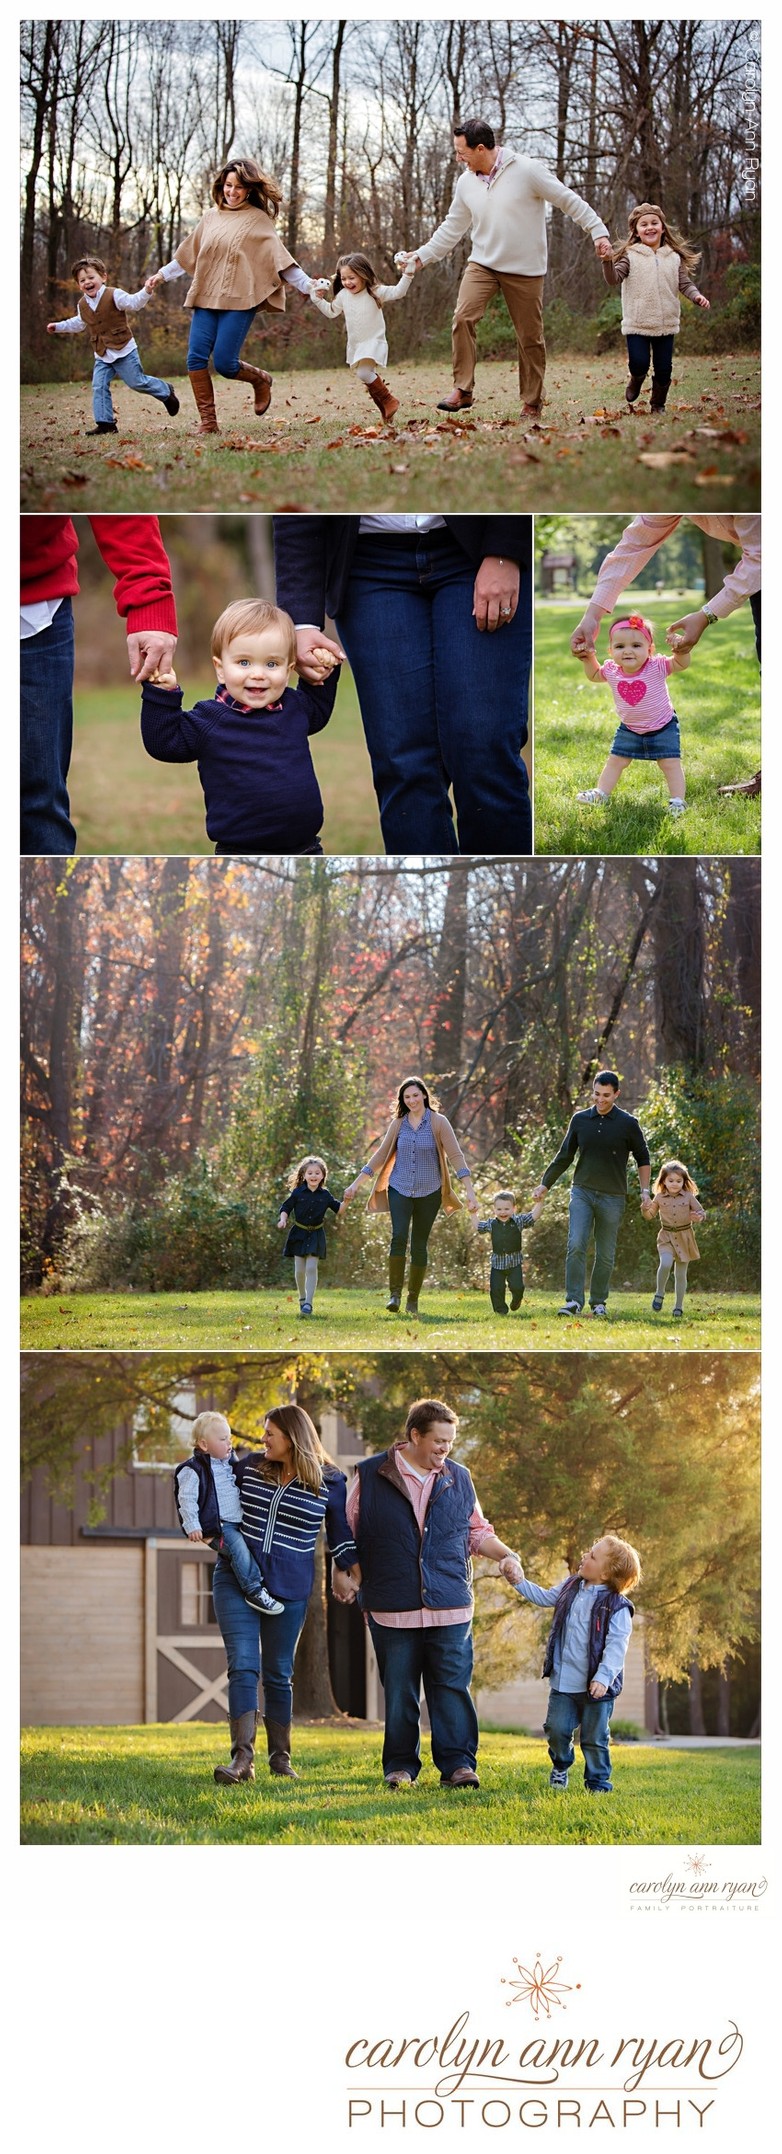 Charlotte Photographer Collage of Families Running